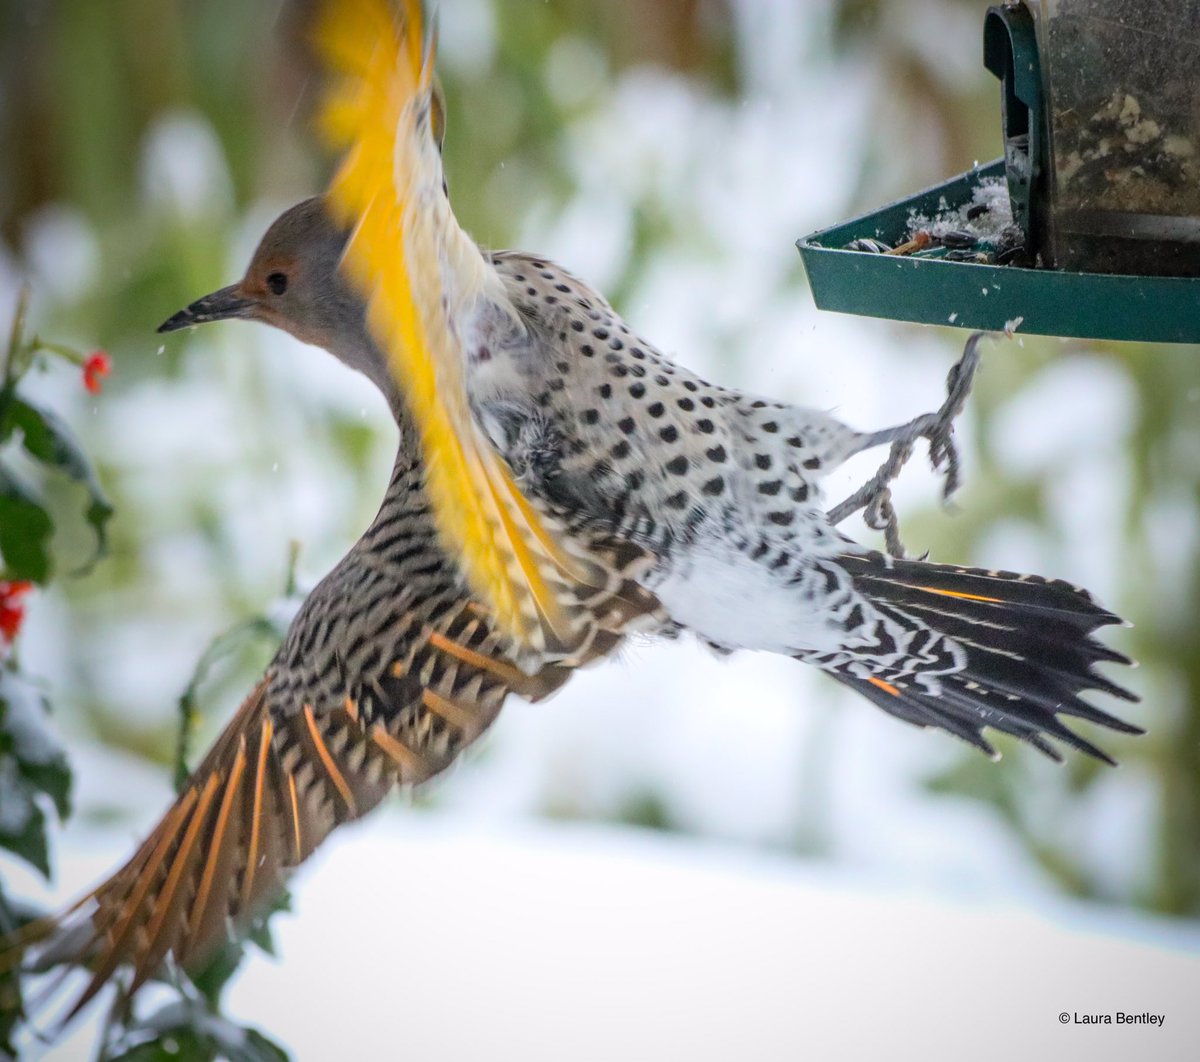 When a  #NorthernFlicker wants to show off their ❤️’s I take the invitation. This yellow shafted female has been a humorous welcome guest the past few days 😊 #BirdsAreBeautiful distractions for me.